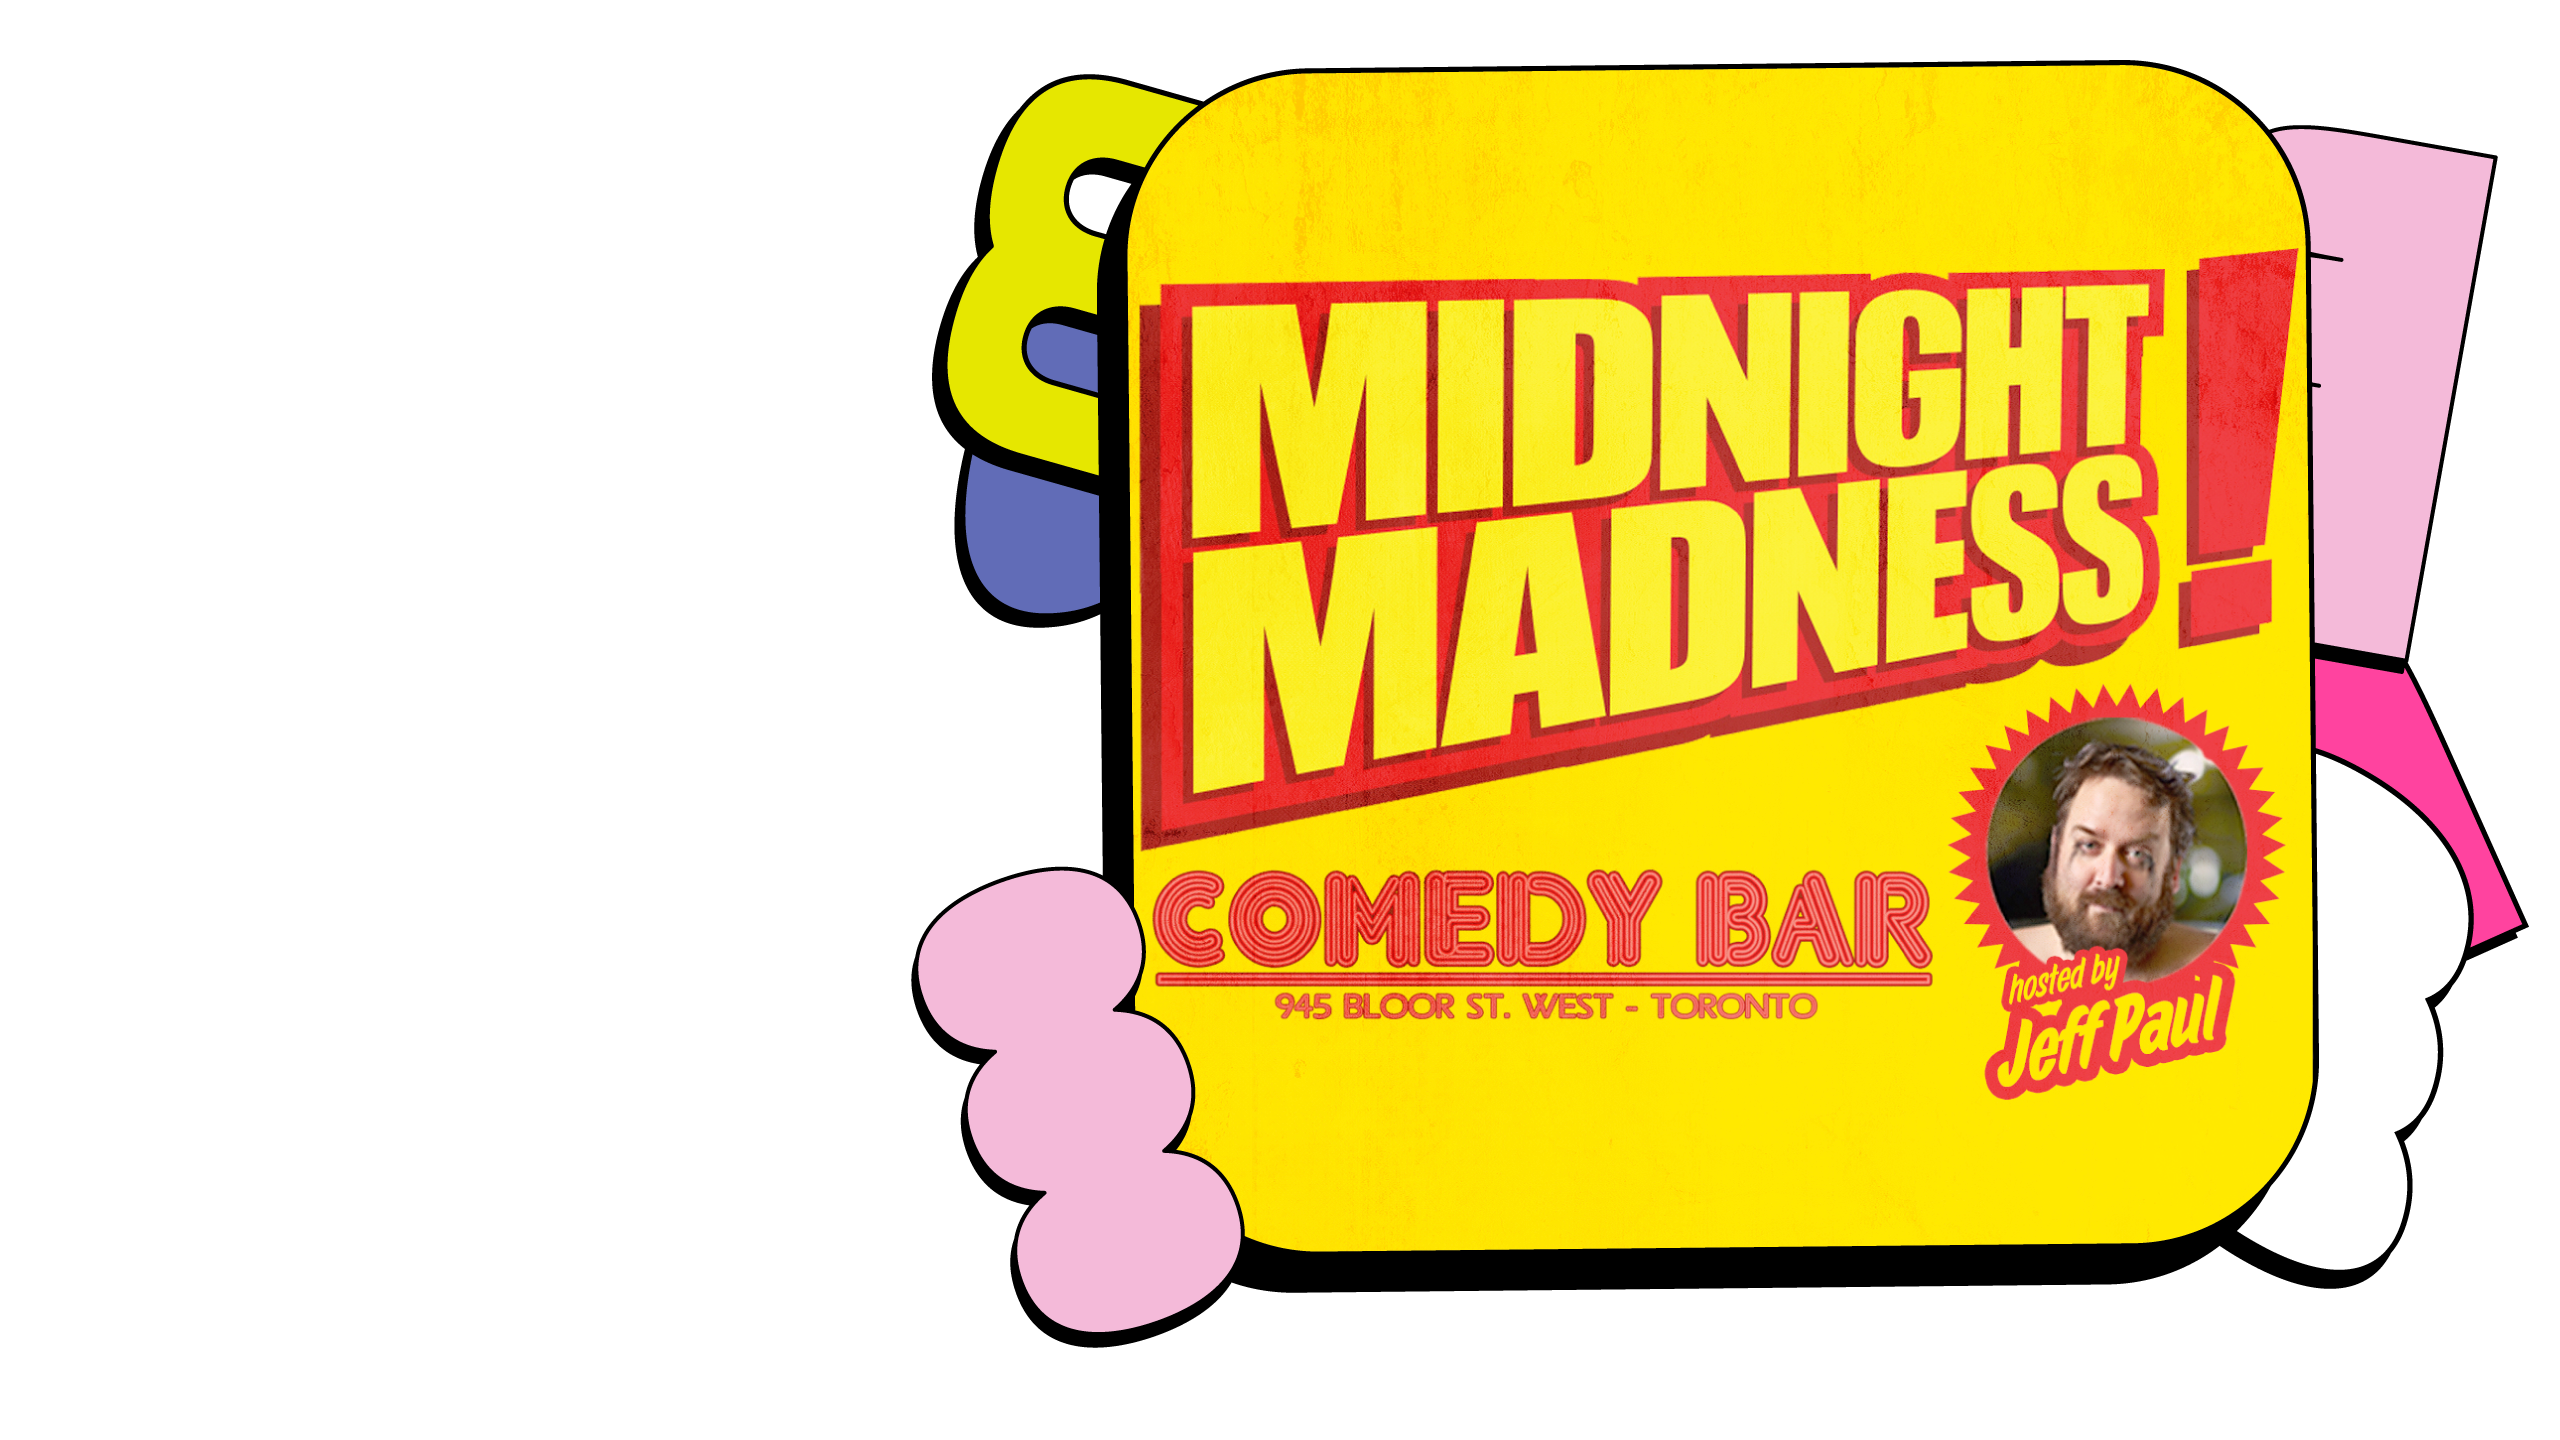 Promotional image for Midnight Madness